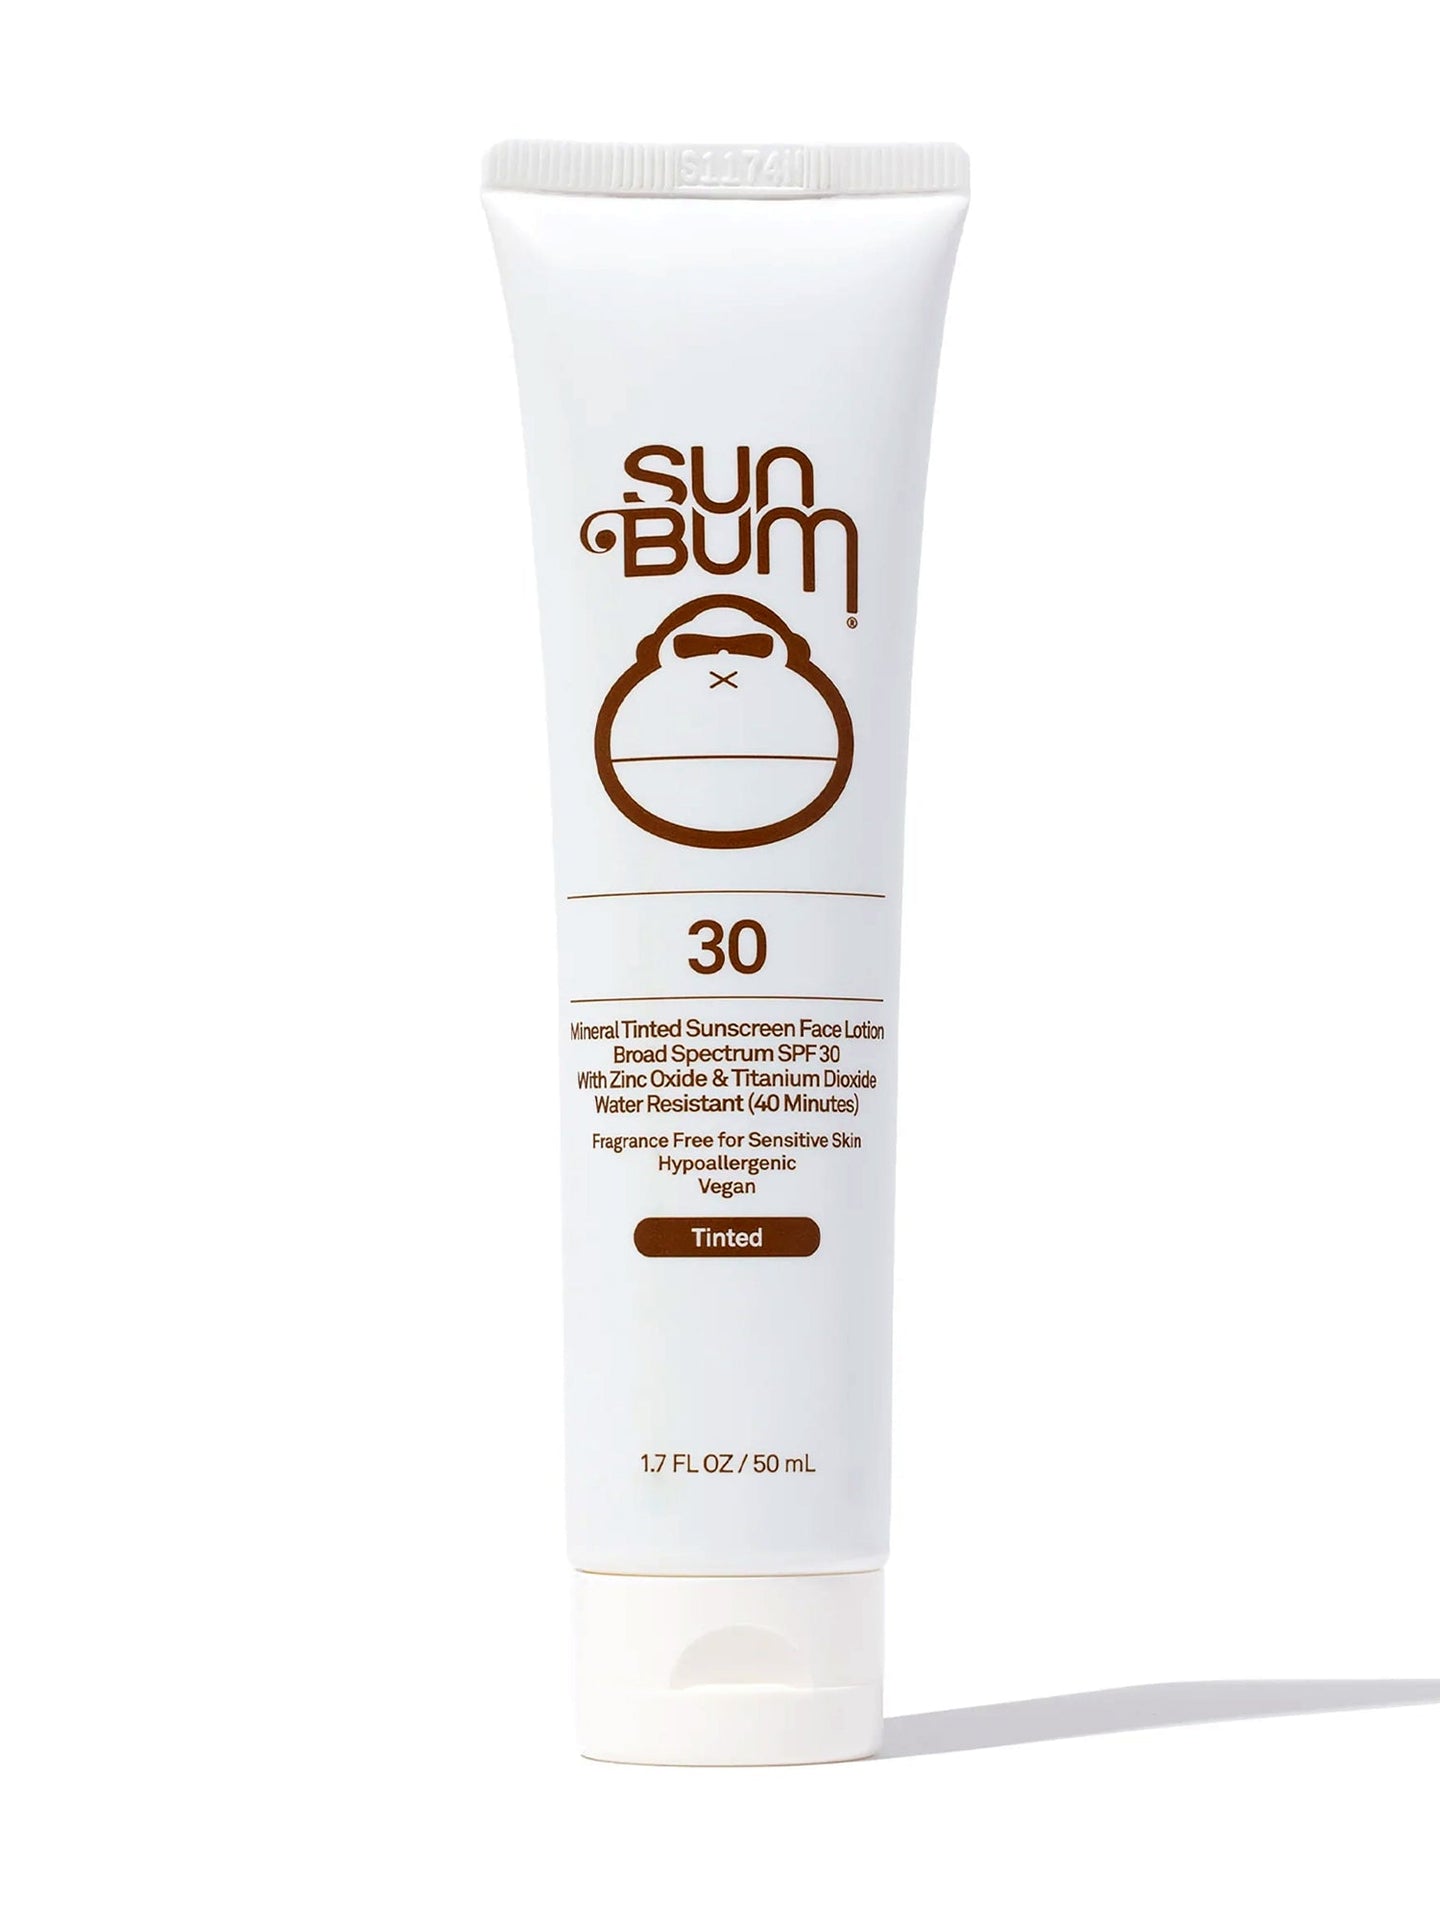 Sun Bum - Mineral SPF Tinted Sunscreen Face Lotion